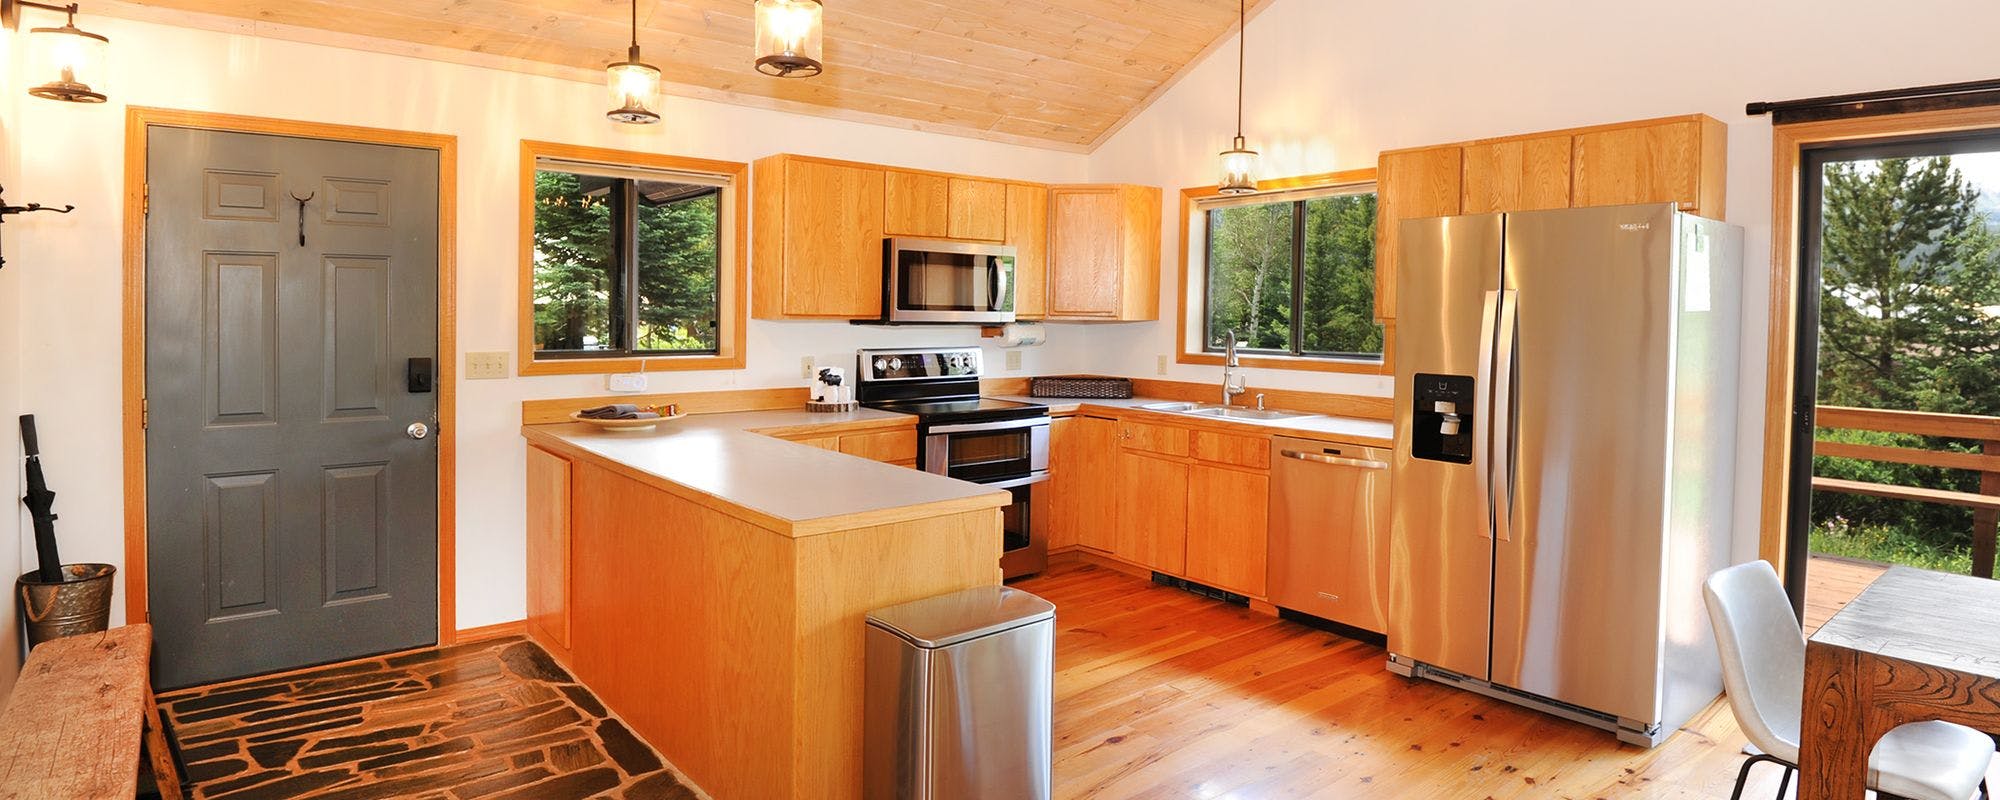 Kitchen in a West Yellowstone, MT vacation rental.